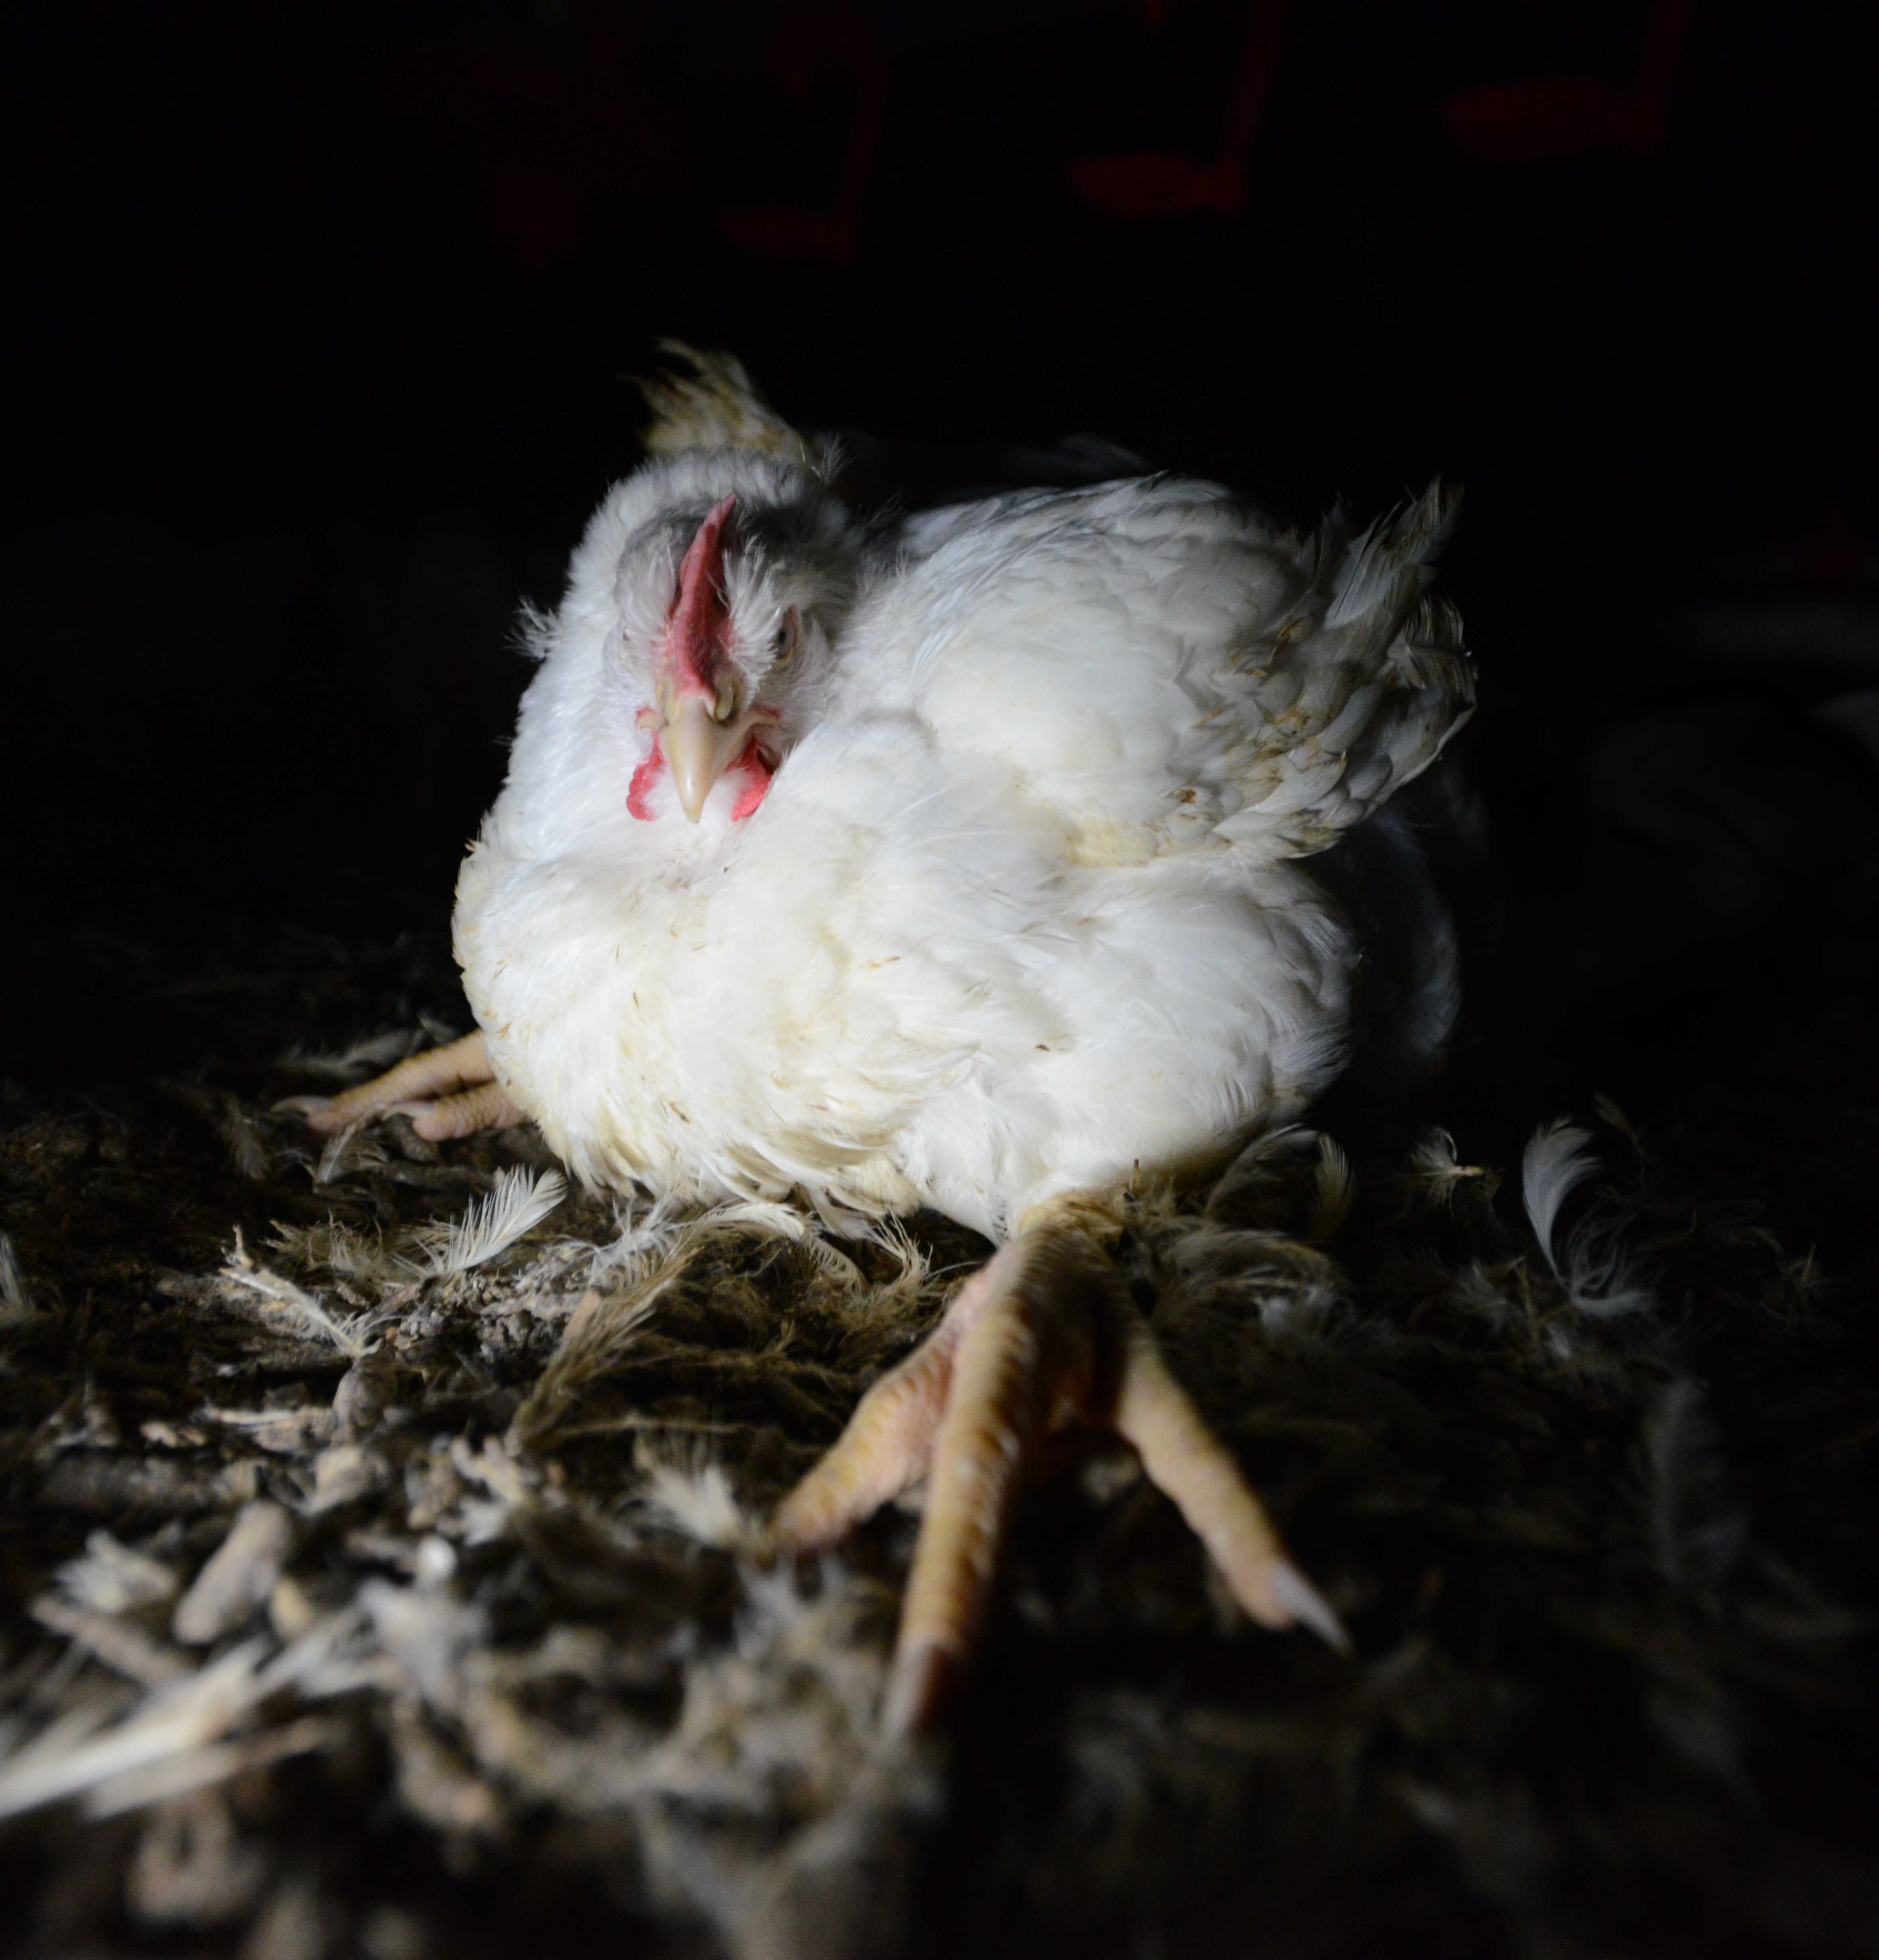 Speak Up For Chickens and Turkeys During the Poultry Code of Practice Comment Period